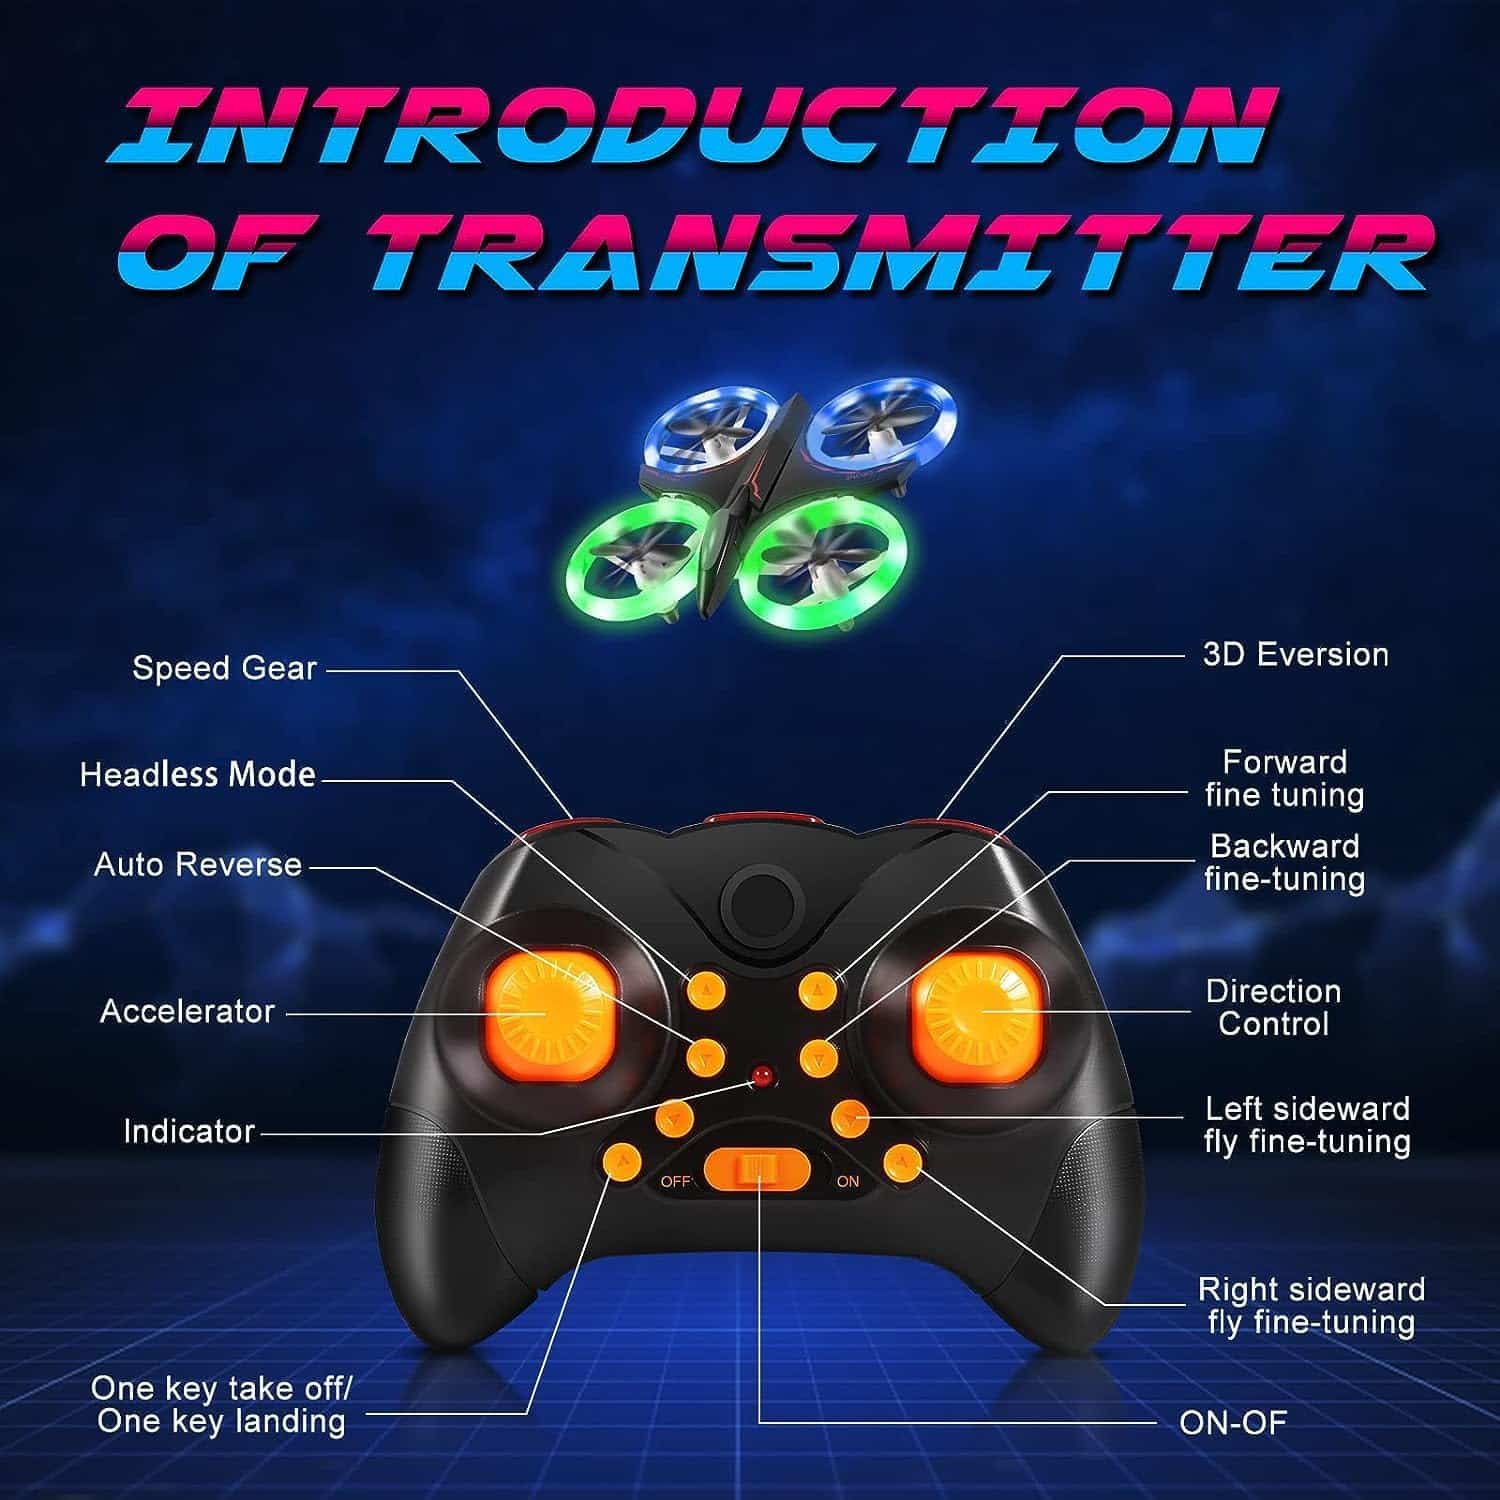 Mini Drone with LED Light: A Fun and Exciting RC Drone for Kids